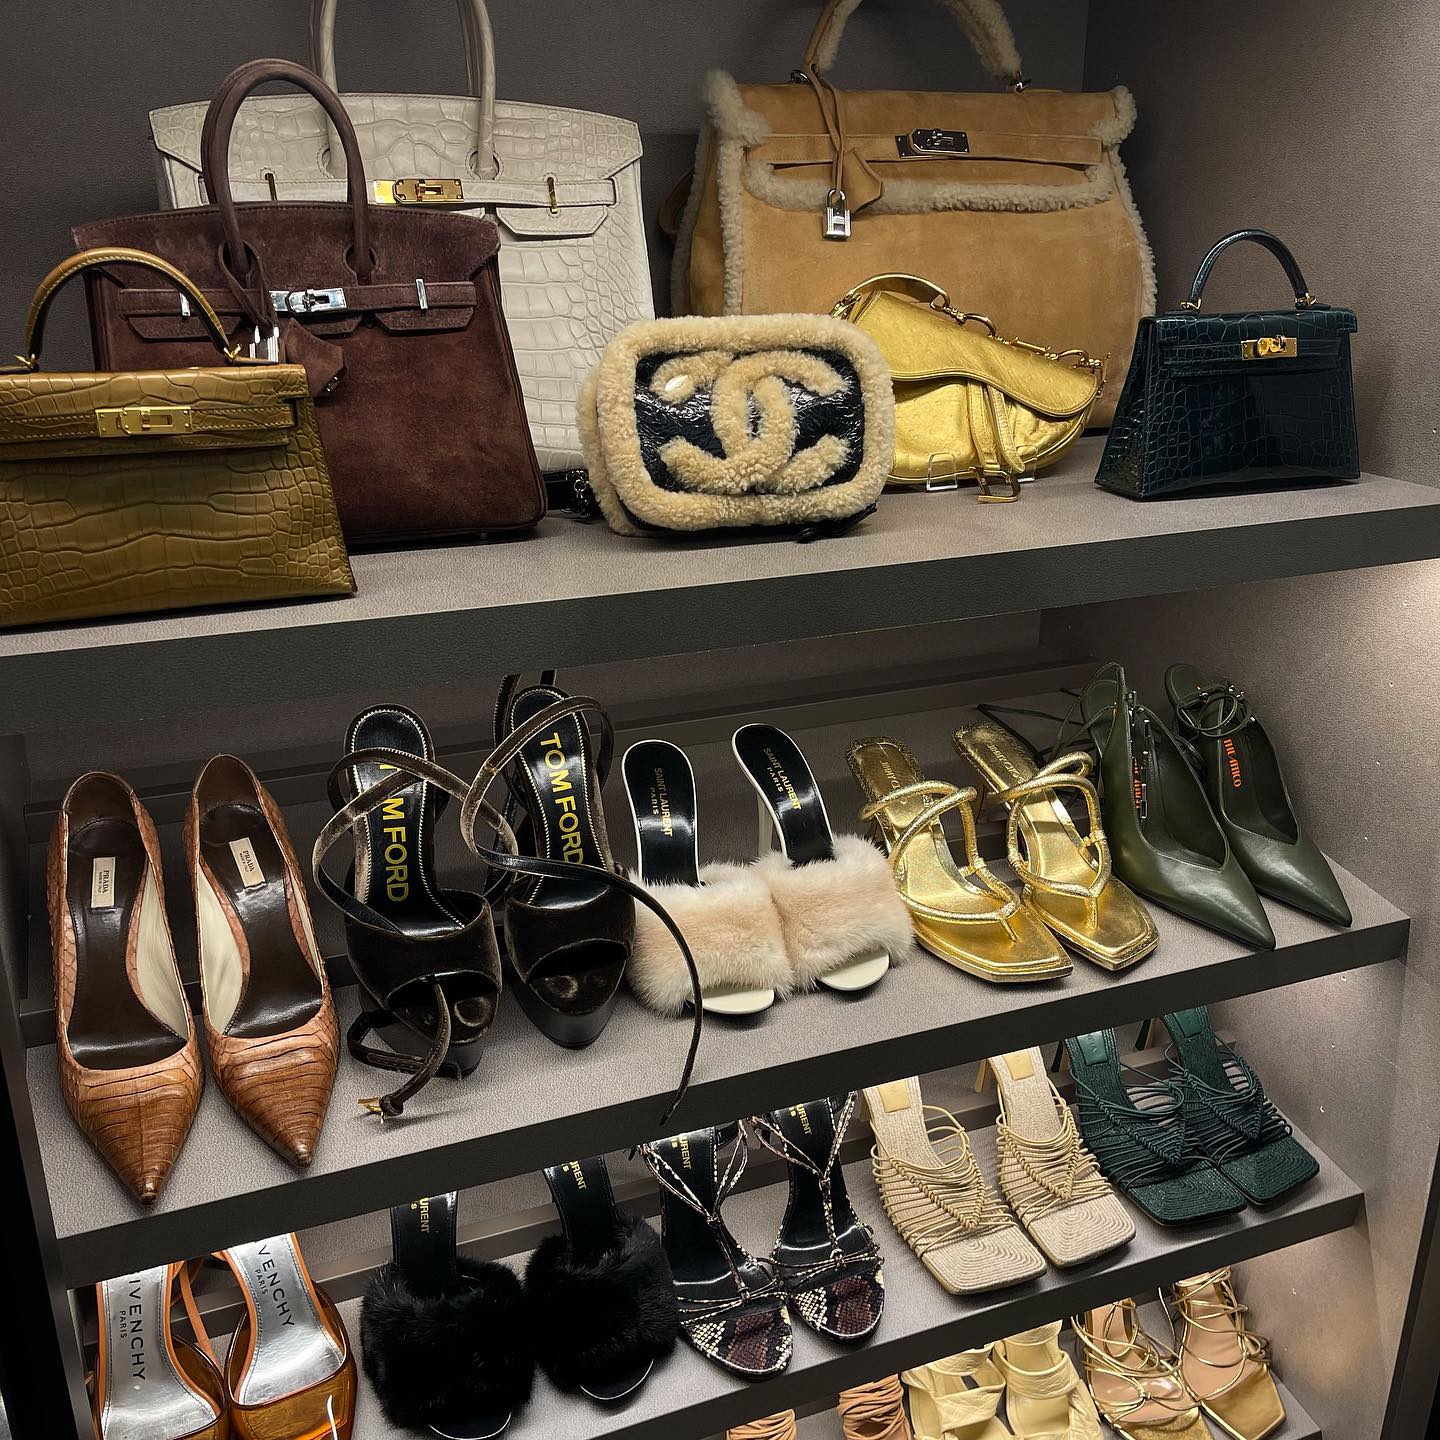 Kylie Jenner Shows Glimpse Of Her Expansive Shoe Collection